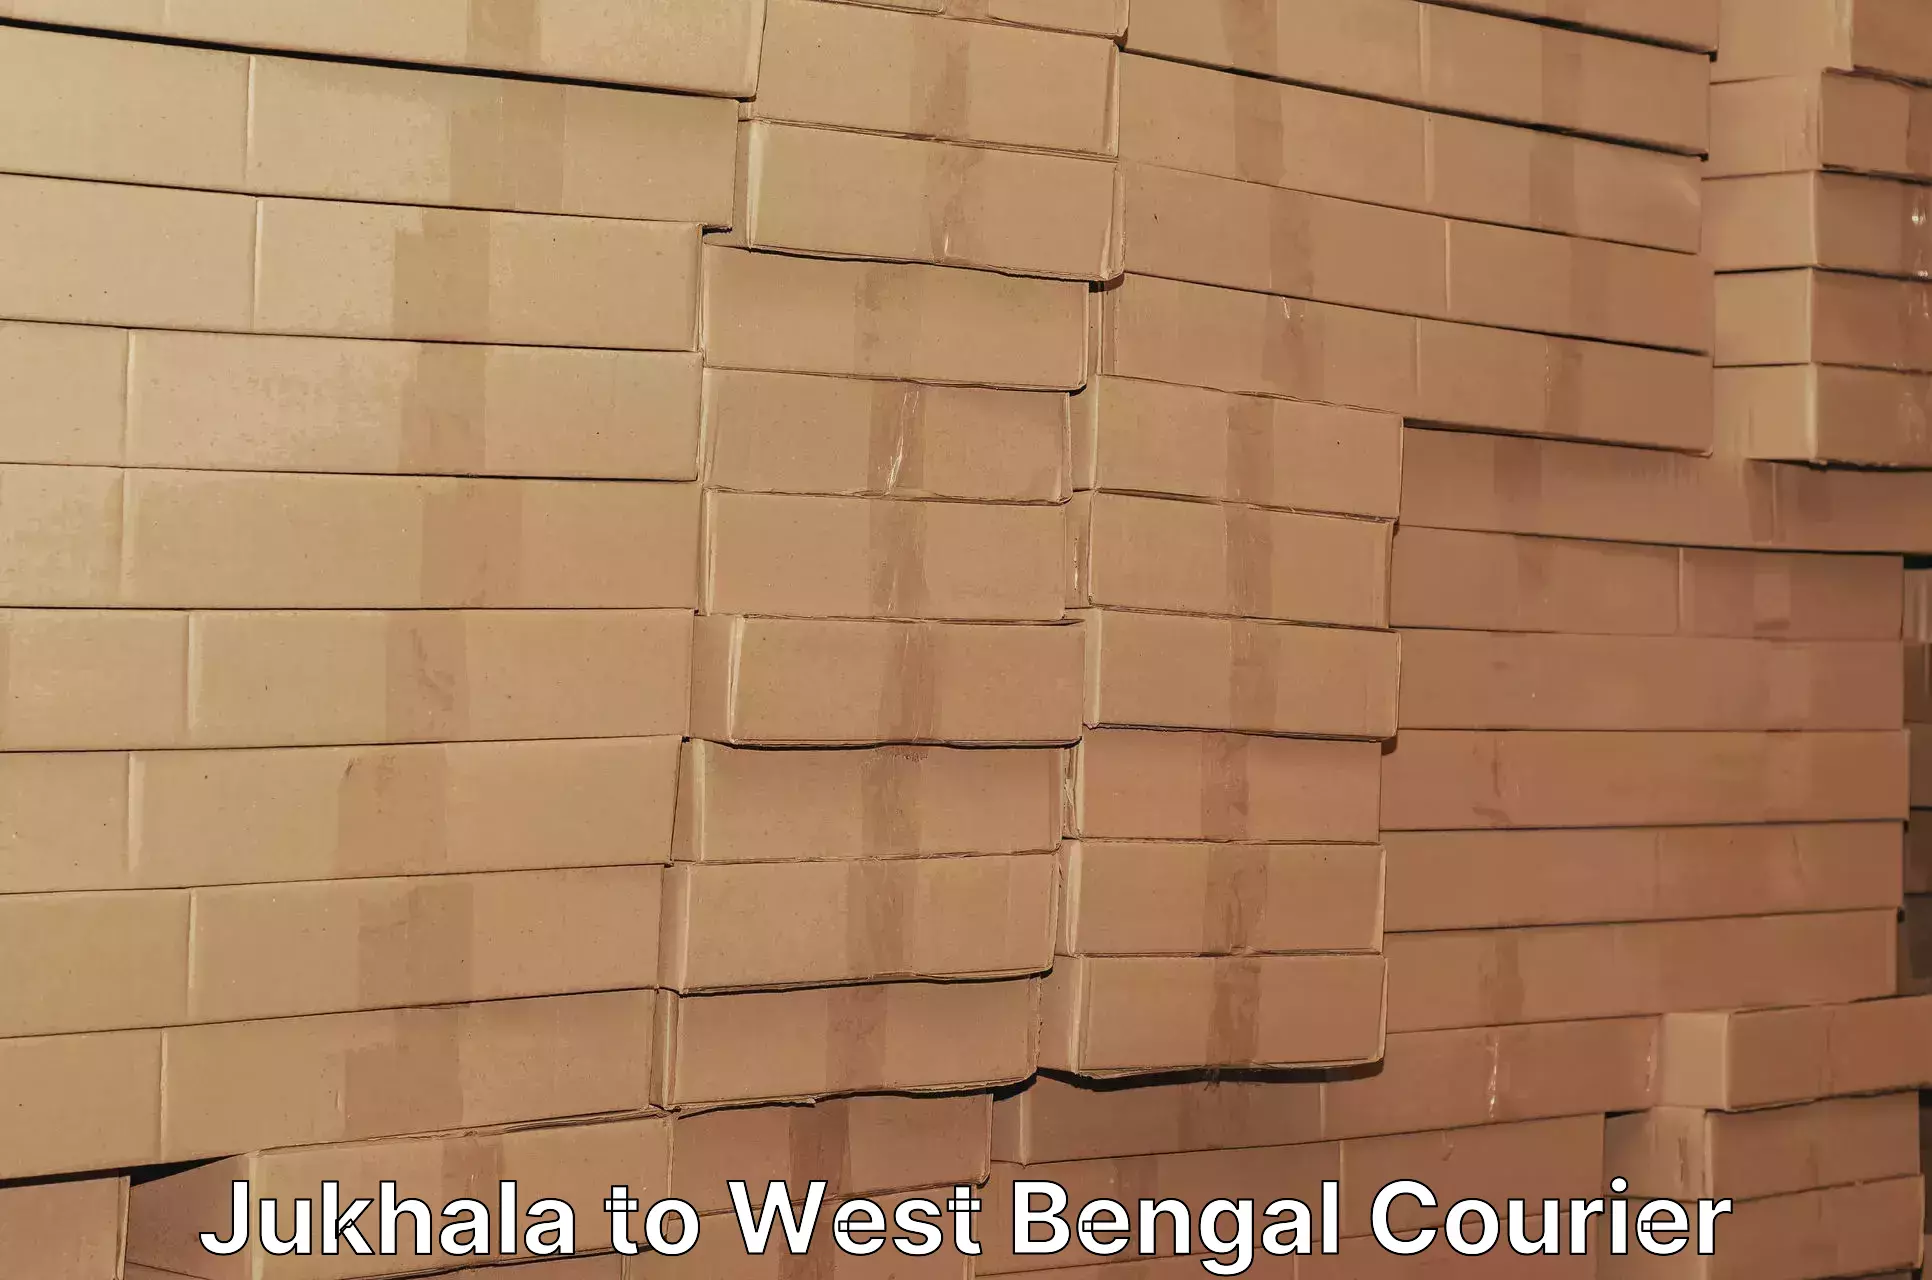 Bulk courier orders Jukhala to West Bengal